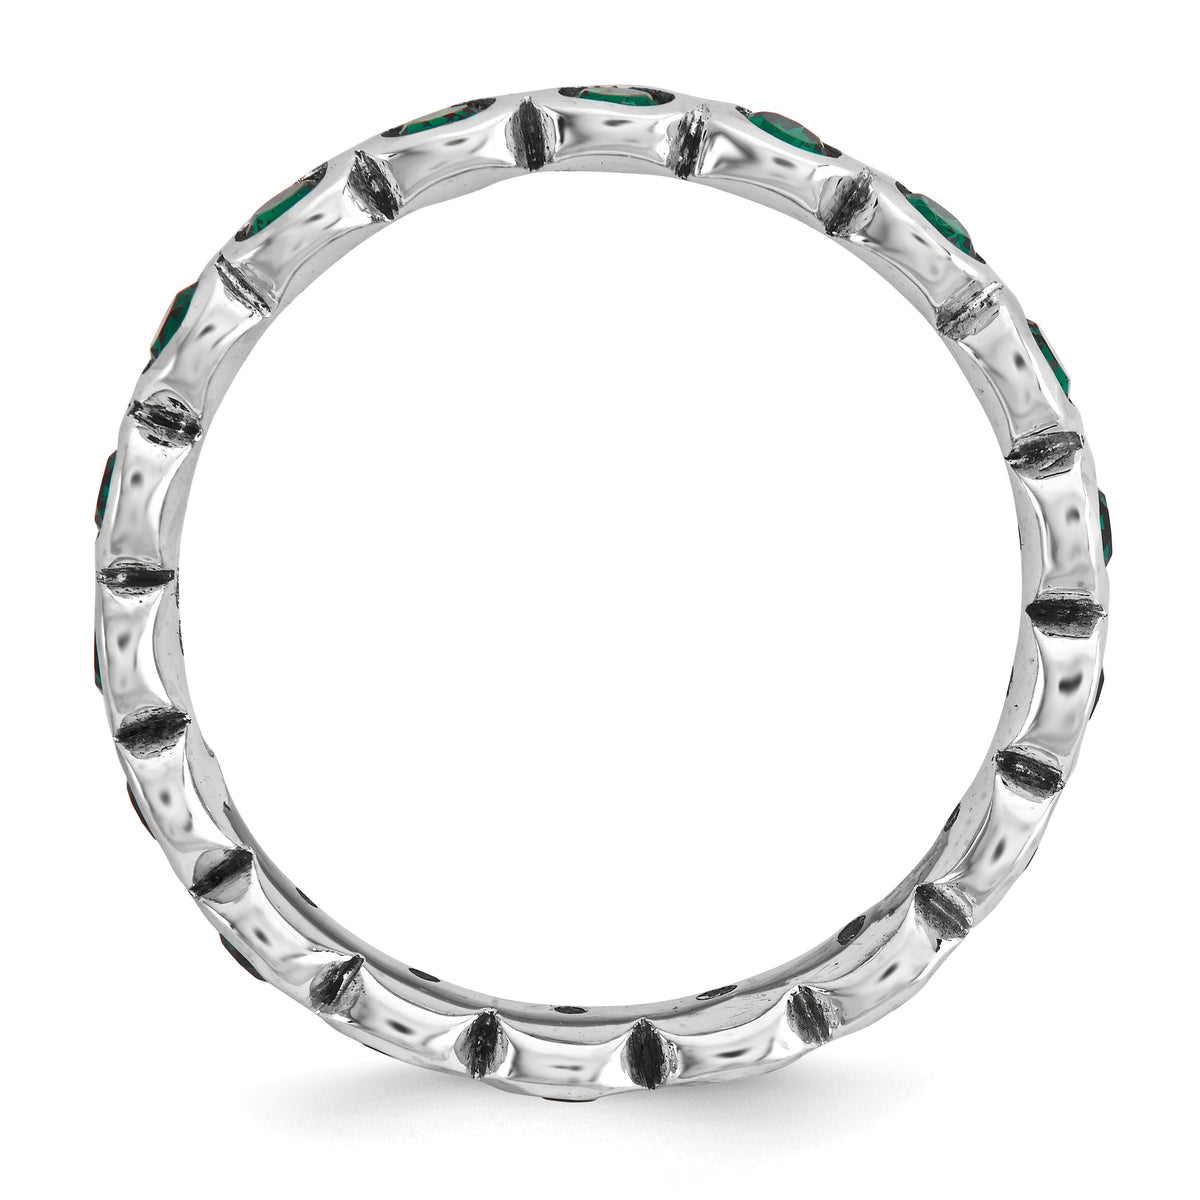 Alternate view of the 3.5mm Sterling Silver with Green Crystals Stackable Band by The Black Bow Jewelry Co.